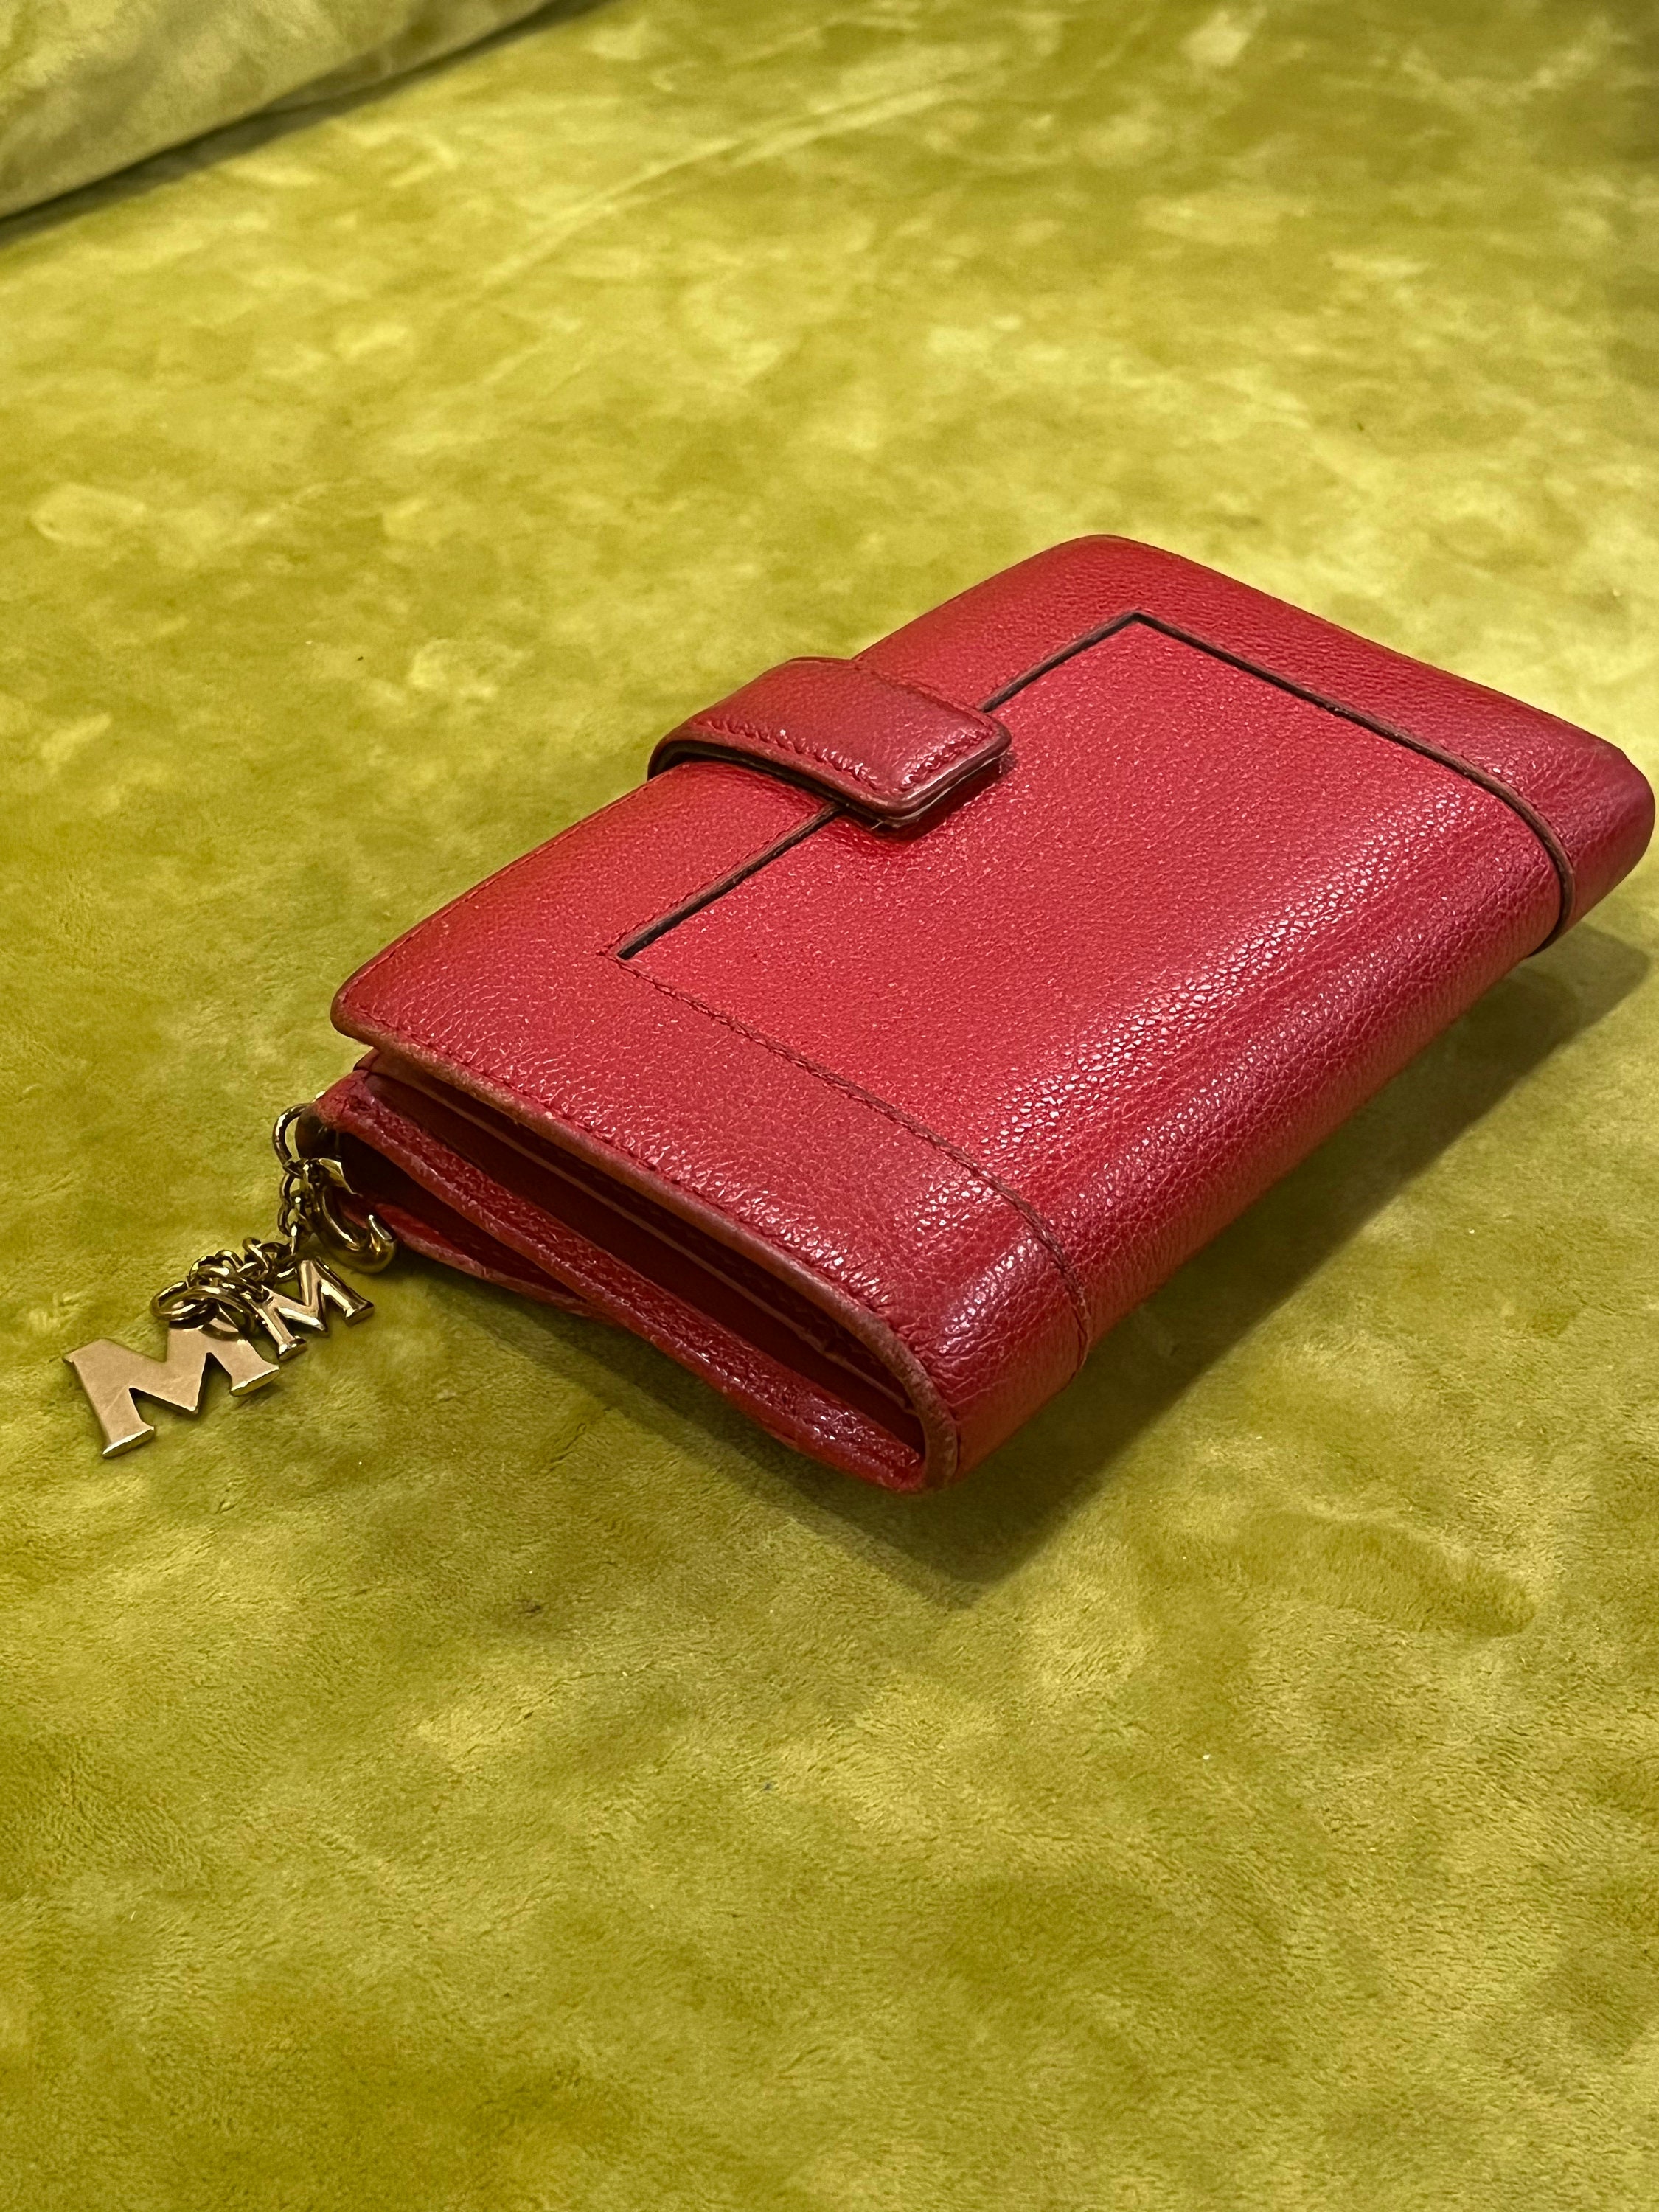 Mcm - Authenticated Wallet - Leather Red for Women, Good Condition